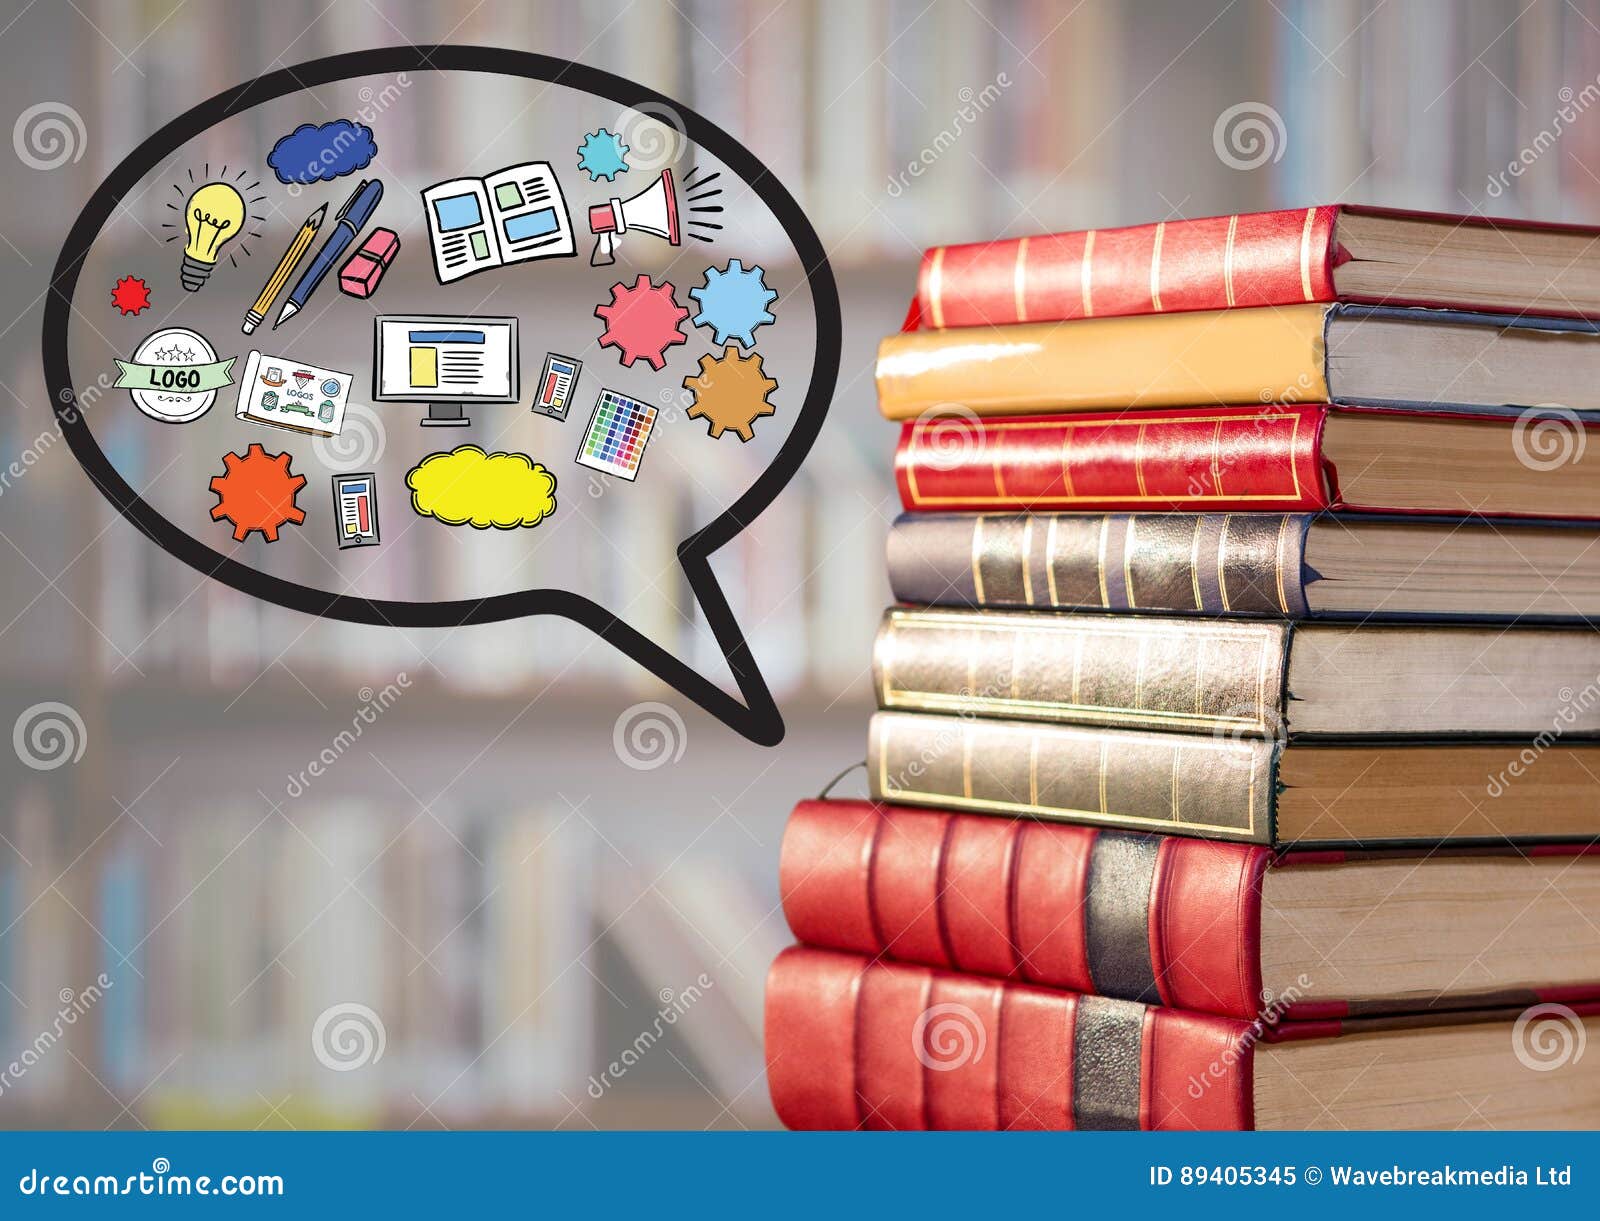 Pile Of Books With Speech Bubble And Graphics Against Blurry